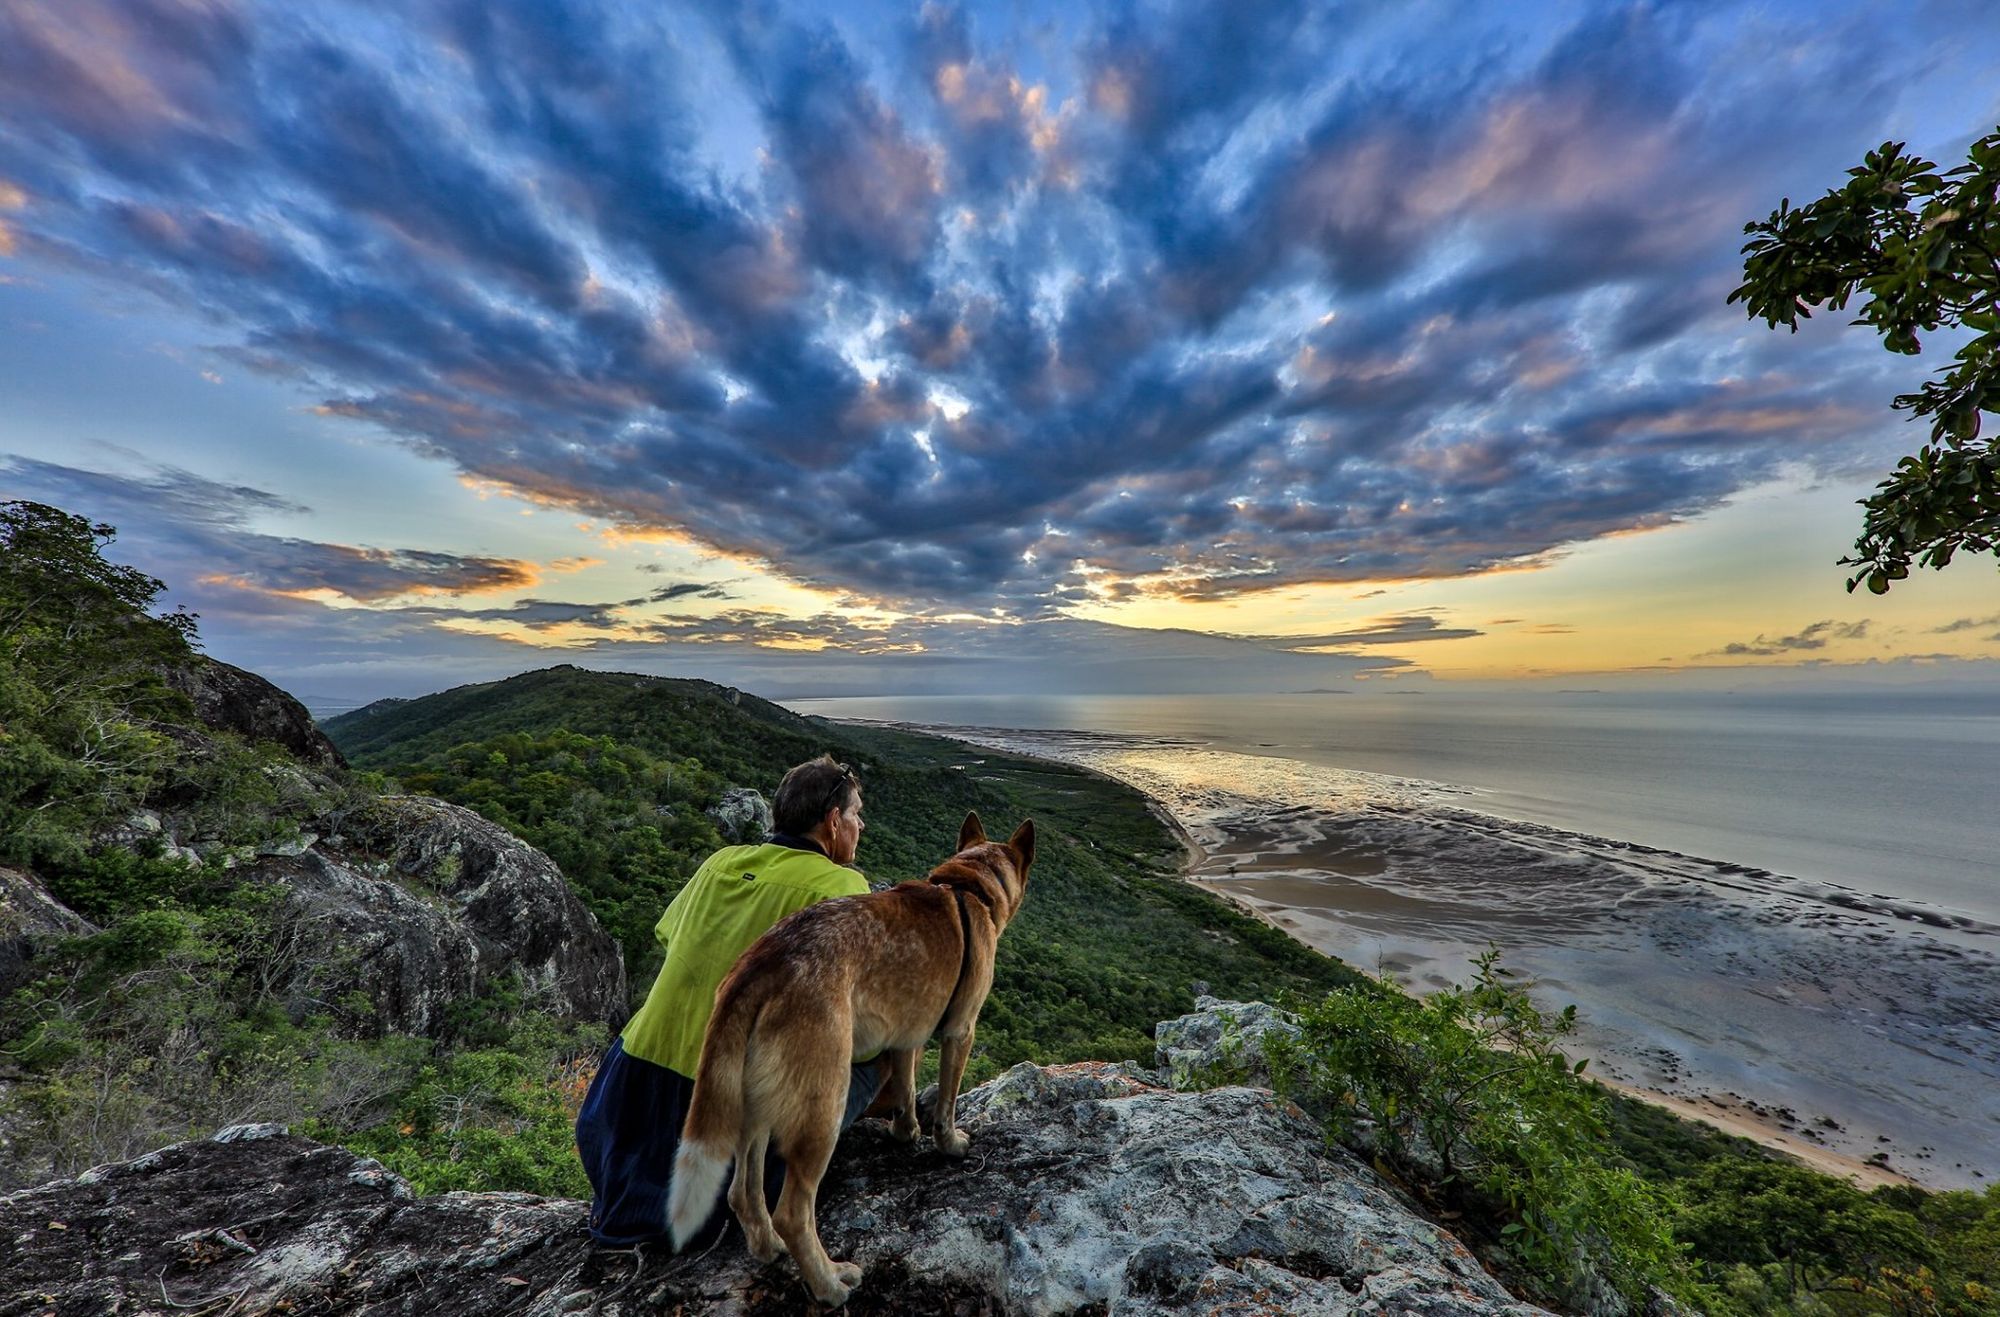 Dog-friendly adventures places and walking tracks around Townsville